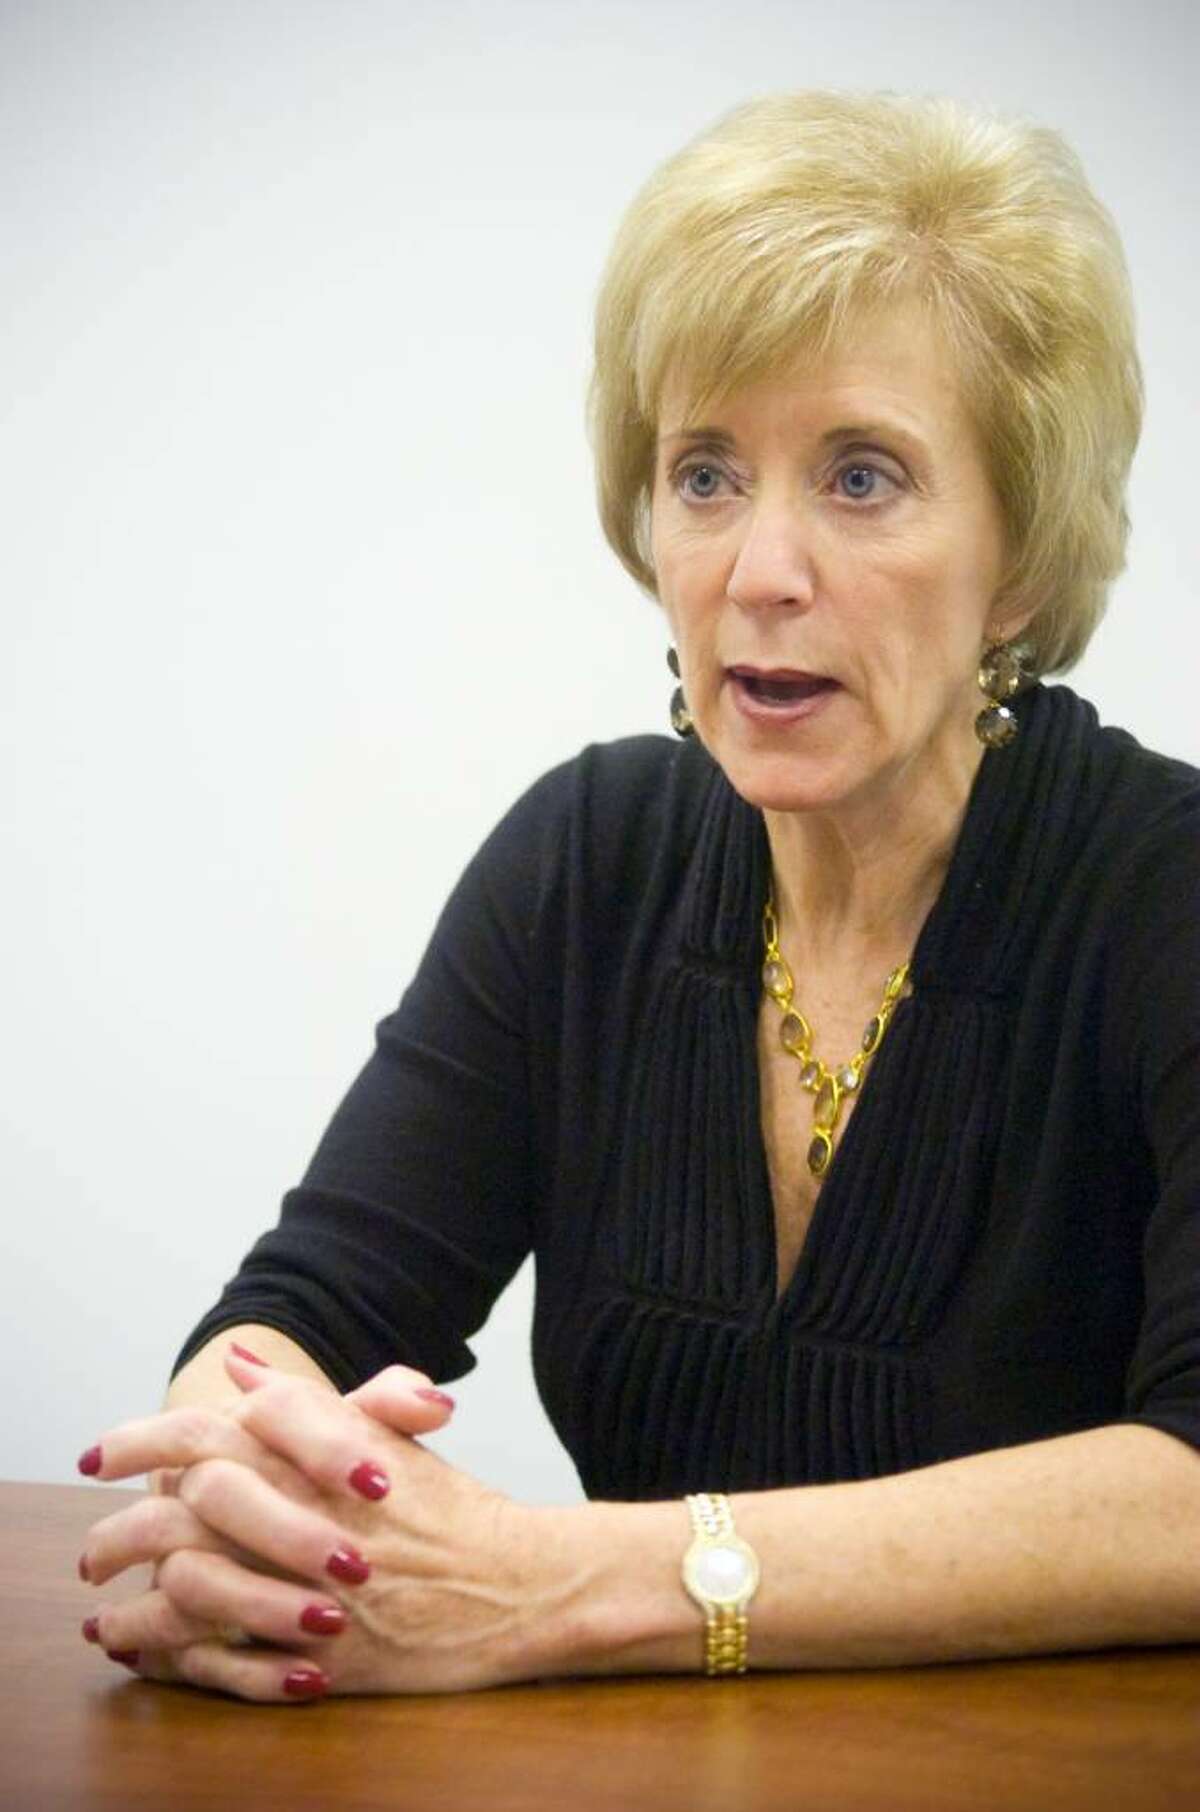 File photo of Linda McMahon, former CEO of World Wrestling Entertainment and current Republican candidate for U.S. Senate, during an interview at her campaign headquarters in Stamford, Conn. on Tuesday, Dec. 15, 2009.